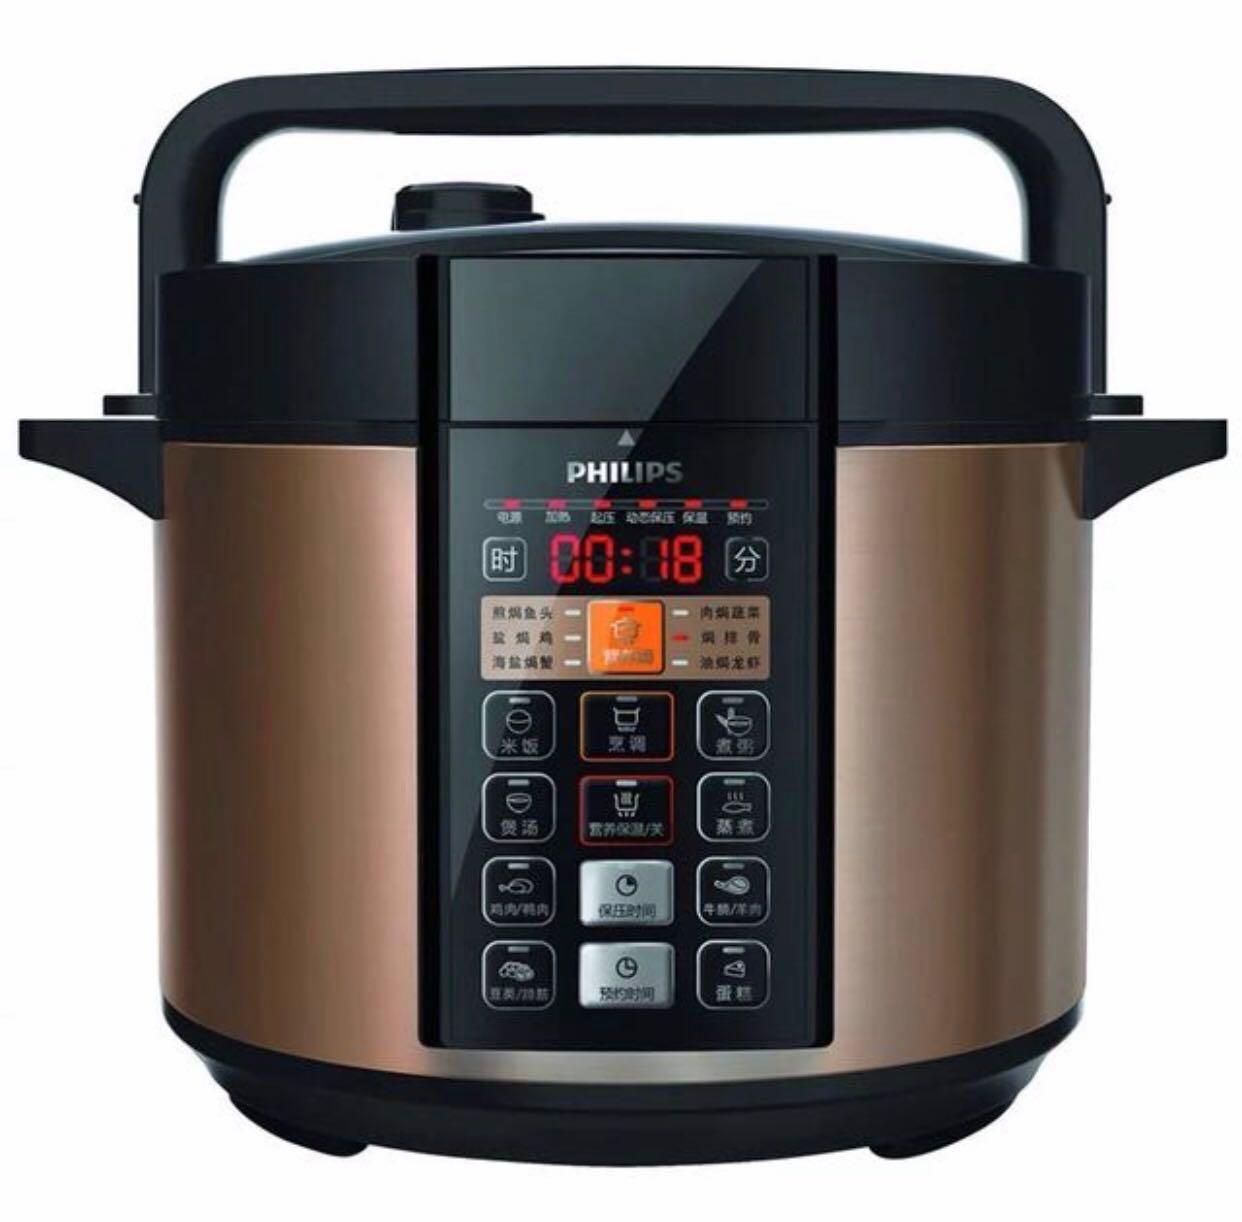 Philips Electric Pressure Cooker Hd2136 Home Appliances Kitchenware On Carousell